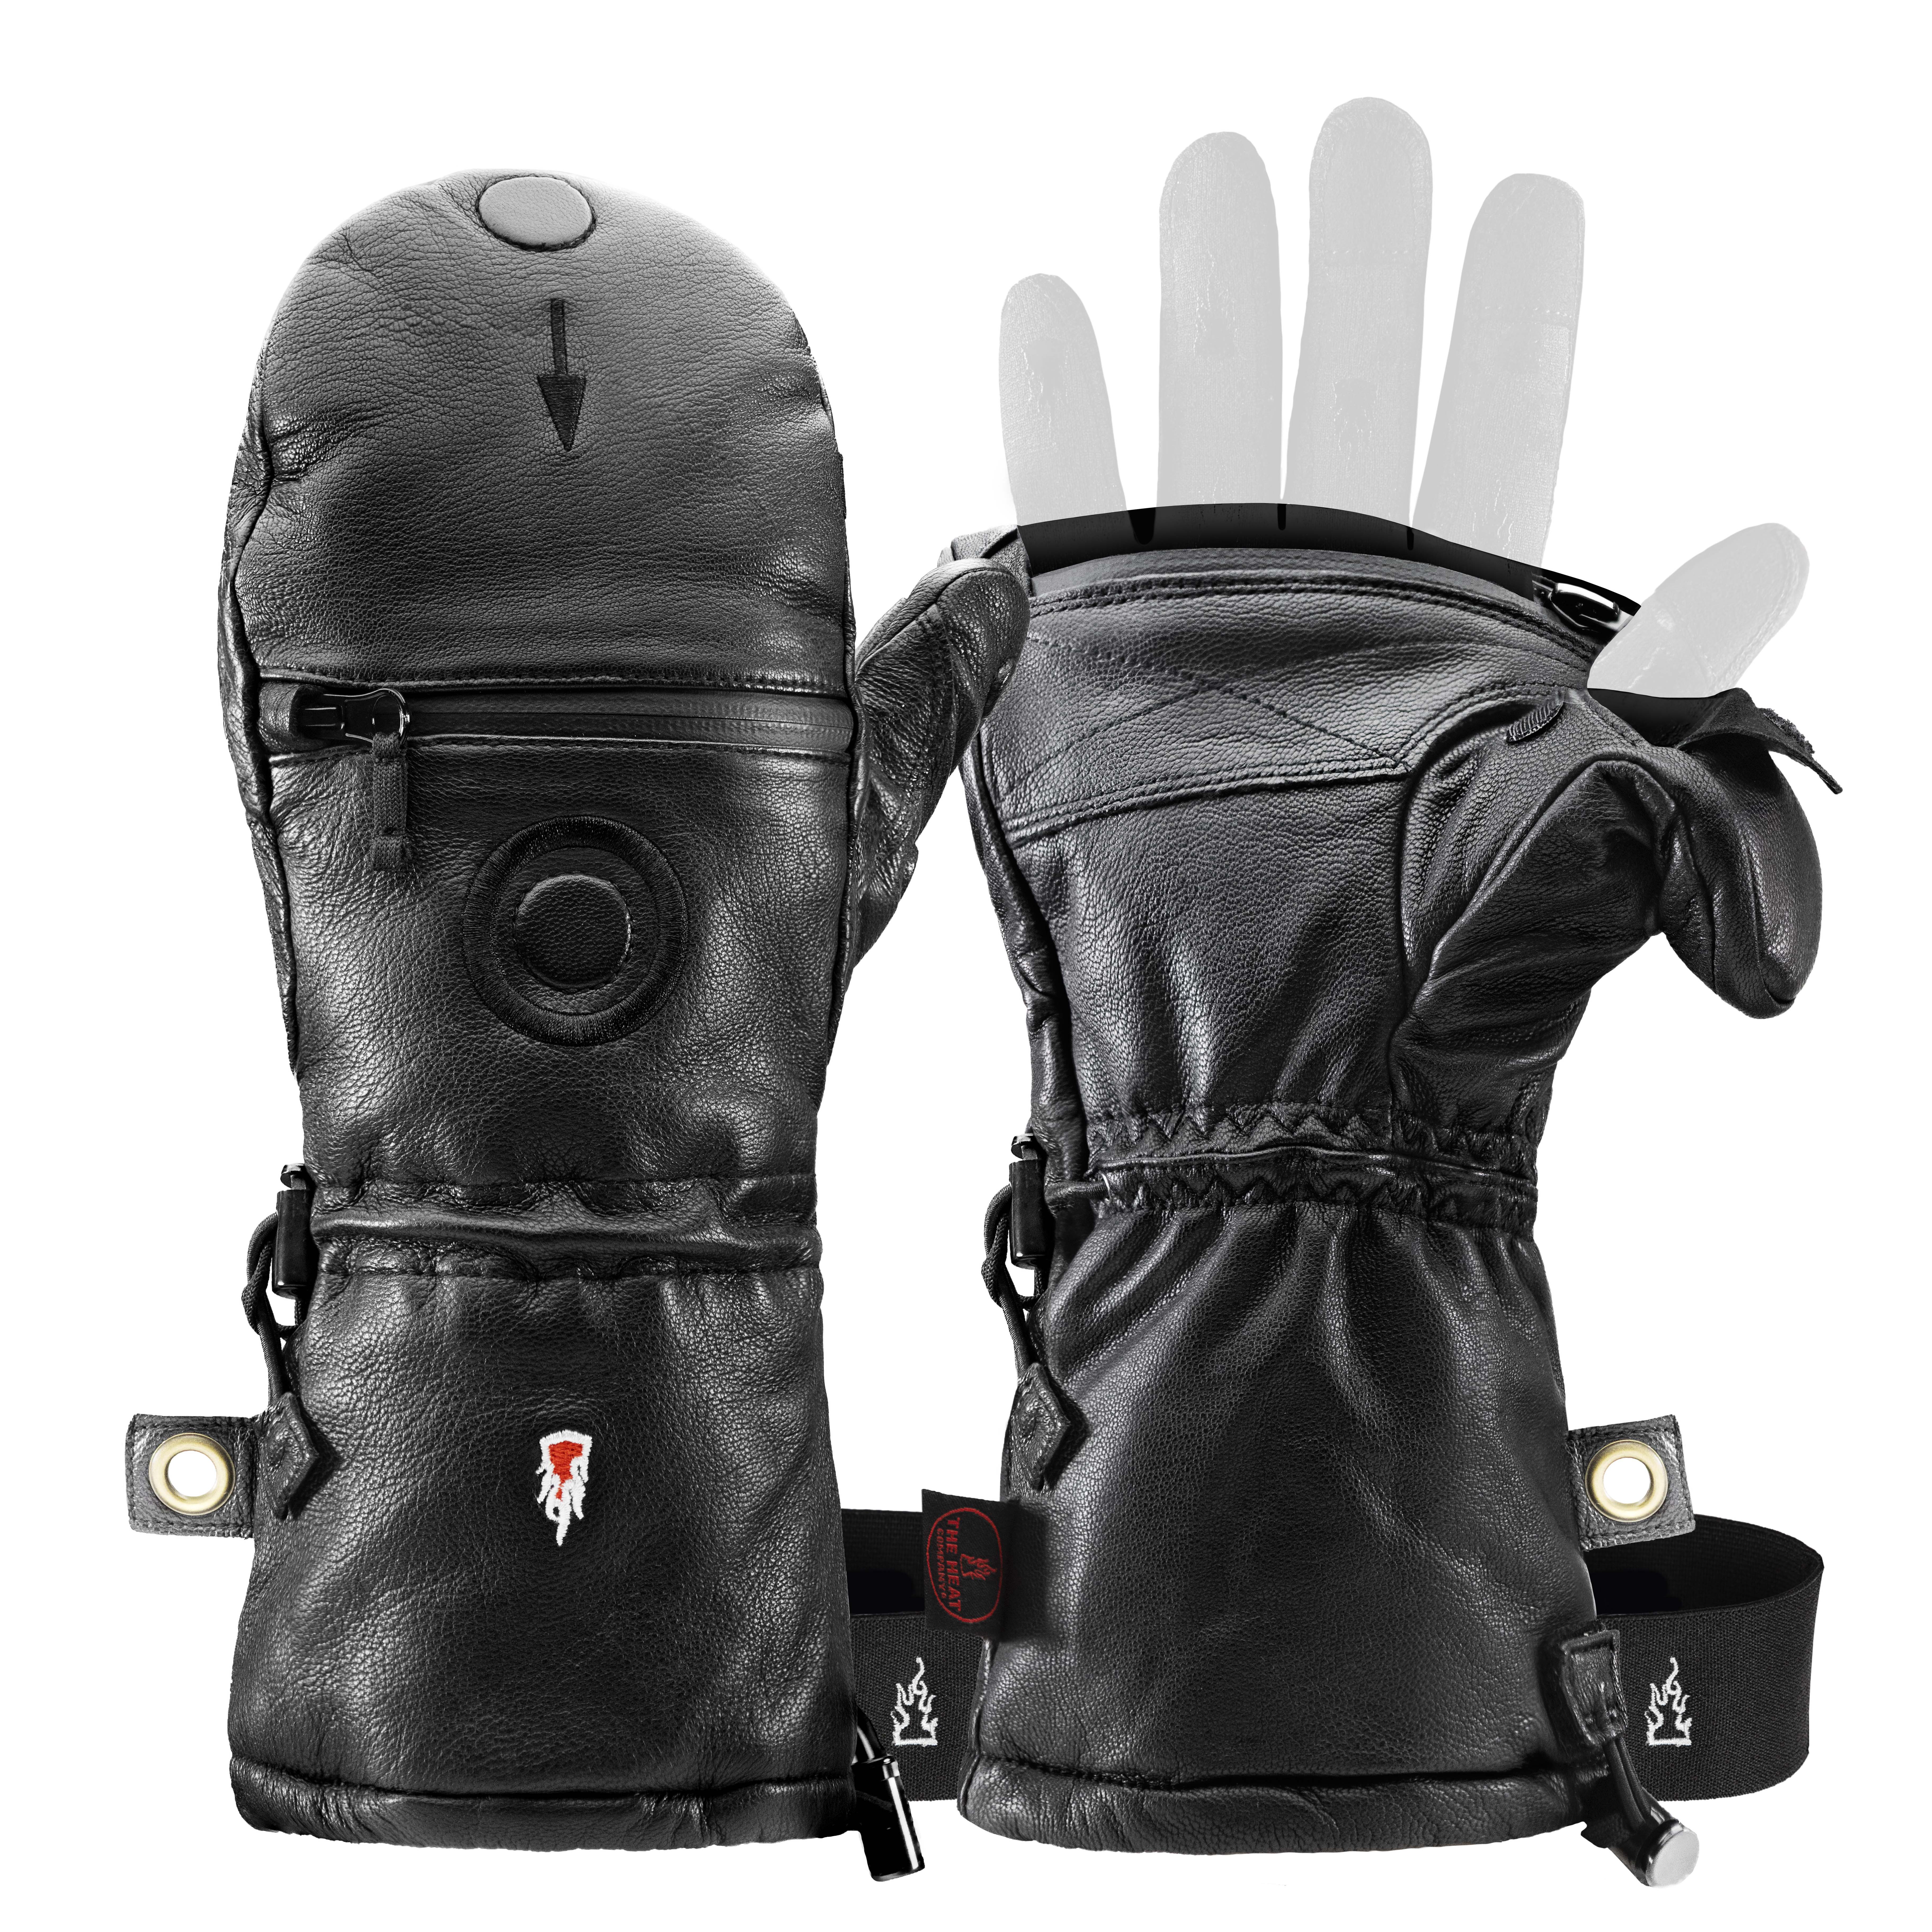 The Heat Company – The Perfect Gloves for Photography - The Time Stuck